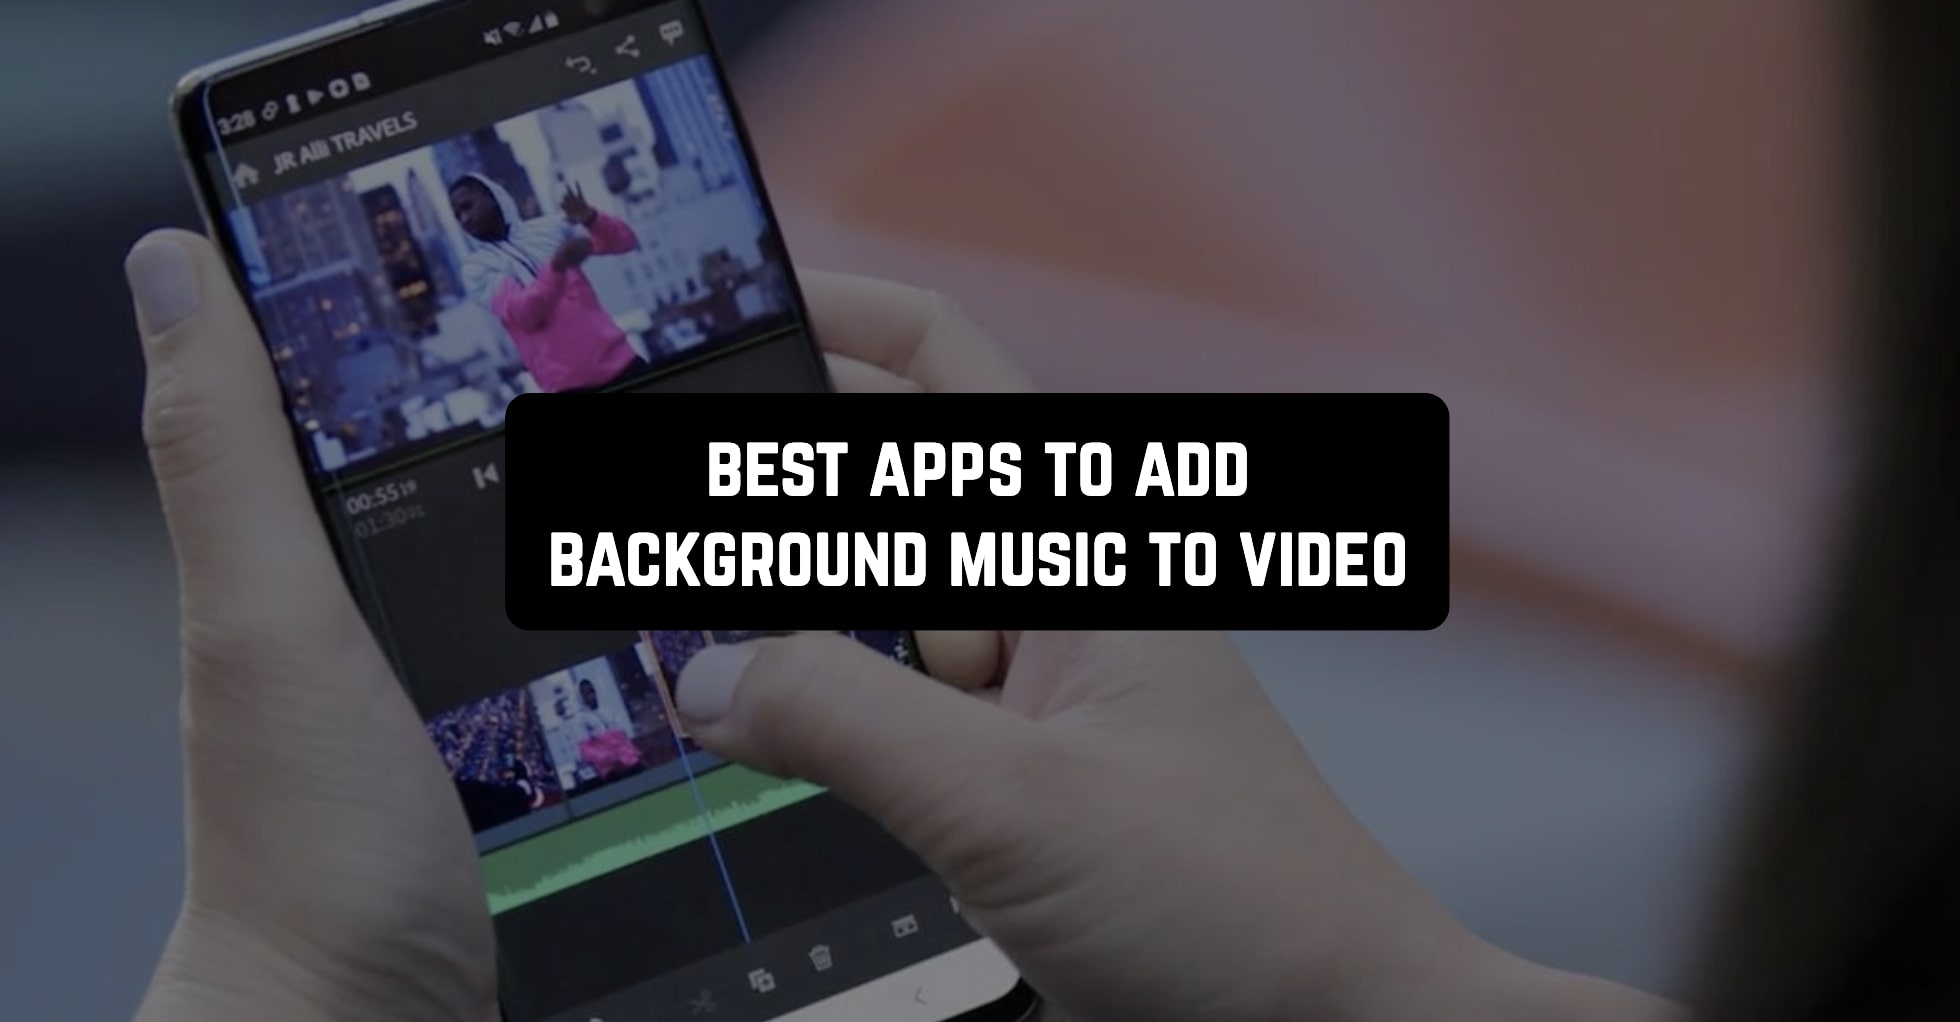 11 Best Apps To Add Background Music To Video (Android & iOS) | Free apps  for Android and iOS